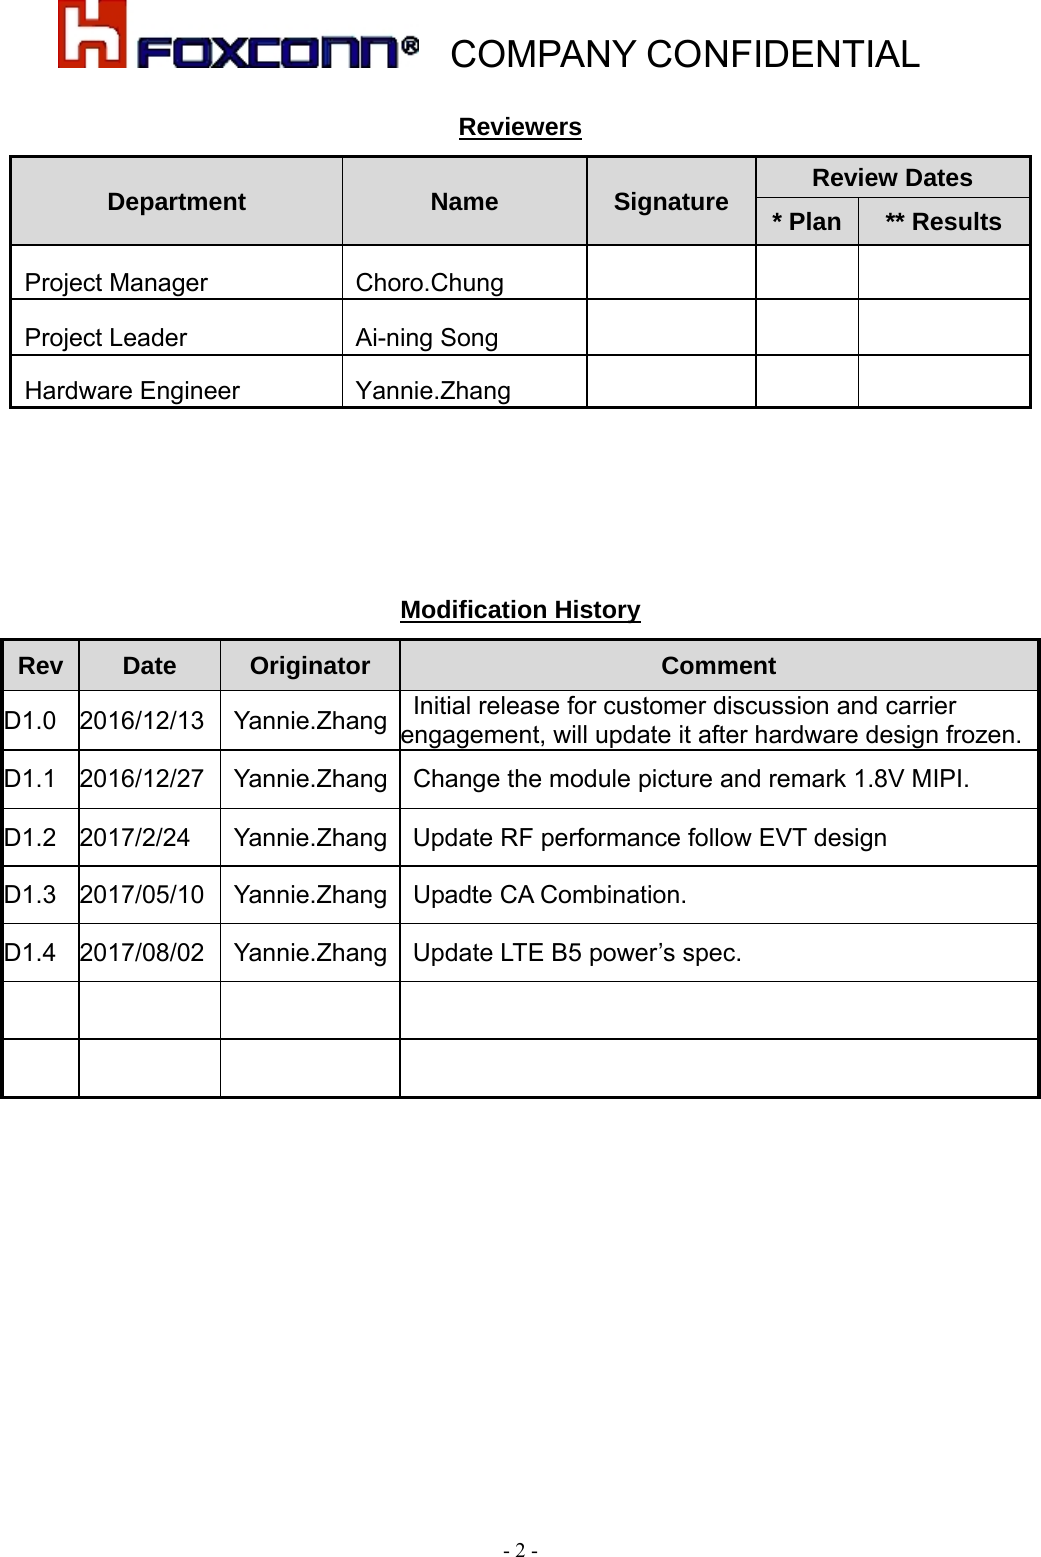    COMPANY CONFIDENTIAL - 2 - Reviewers Department Name  Signature  Review Dates * Plan  ** Results  Project Manager  Choro.Chung         Project Leader  Ai-ning Song        Hardware Engineer   Yannie.Zhang           Modification History Rev Date  Originator  Comment D1.0 2016/12/13  Yannie.Zhang Initial release for customer discussion and carrier engagement, will update it after hardware design frozen.D1.1 2016/12/27  Yannie.Zhang  Change the module picture and remark 1.8V MIPI. D1.2 2017/2/24  Yannie.Zhang Update RF performance follow EVT design D1.3 2017/05/10  Yannie.Zhang Upadte CA Combination. D1.4  2017/08/02  Yannie.Zhang  Update LTE B5 power’s spec.              